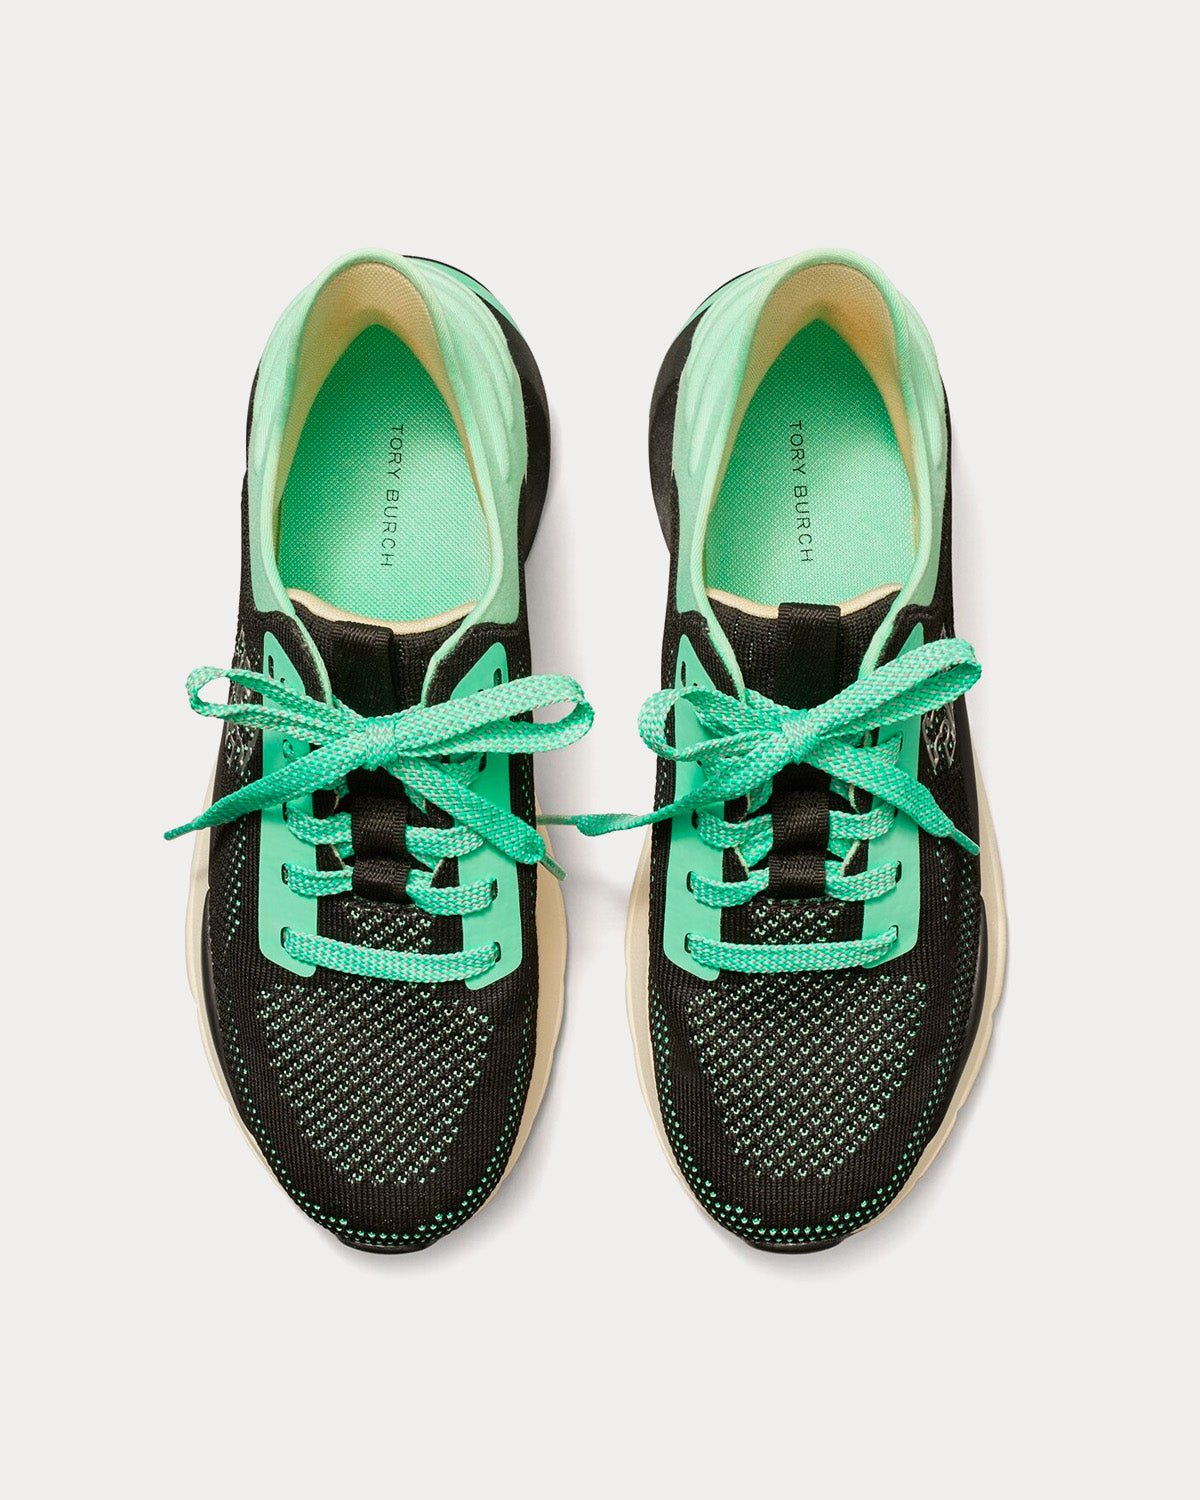 Tory Burch - Good Luck Knit Mint / Black Low Top Sneakers